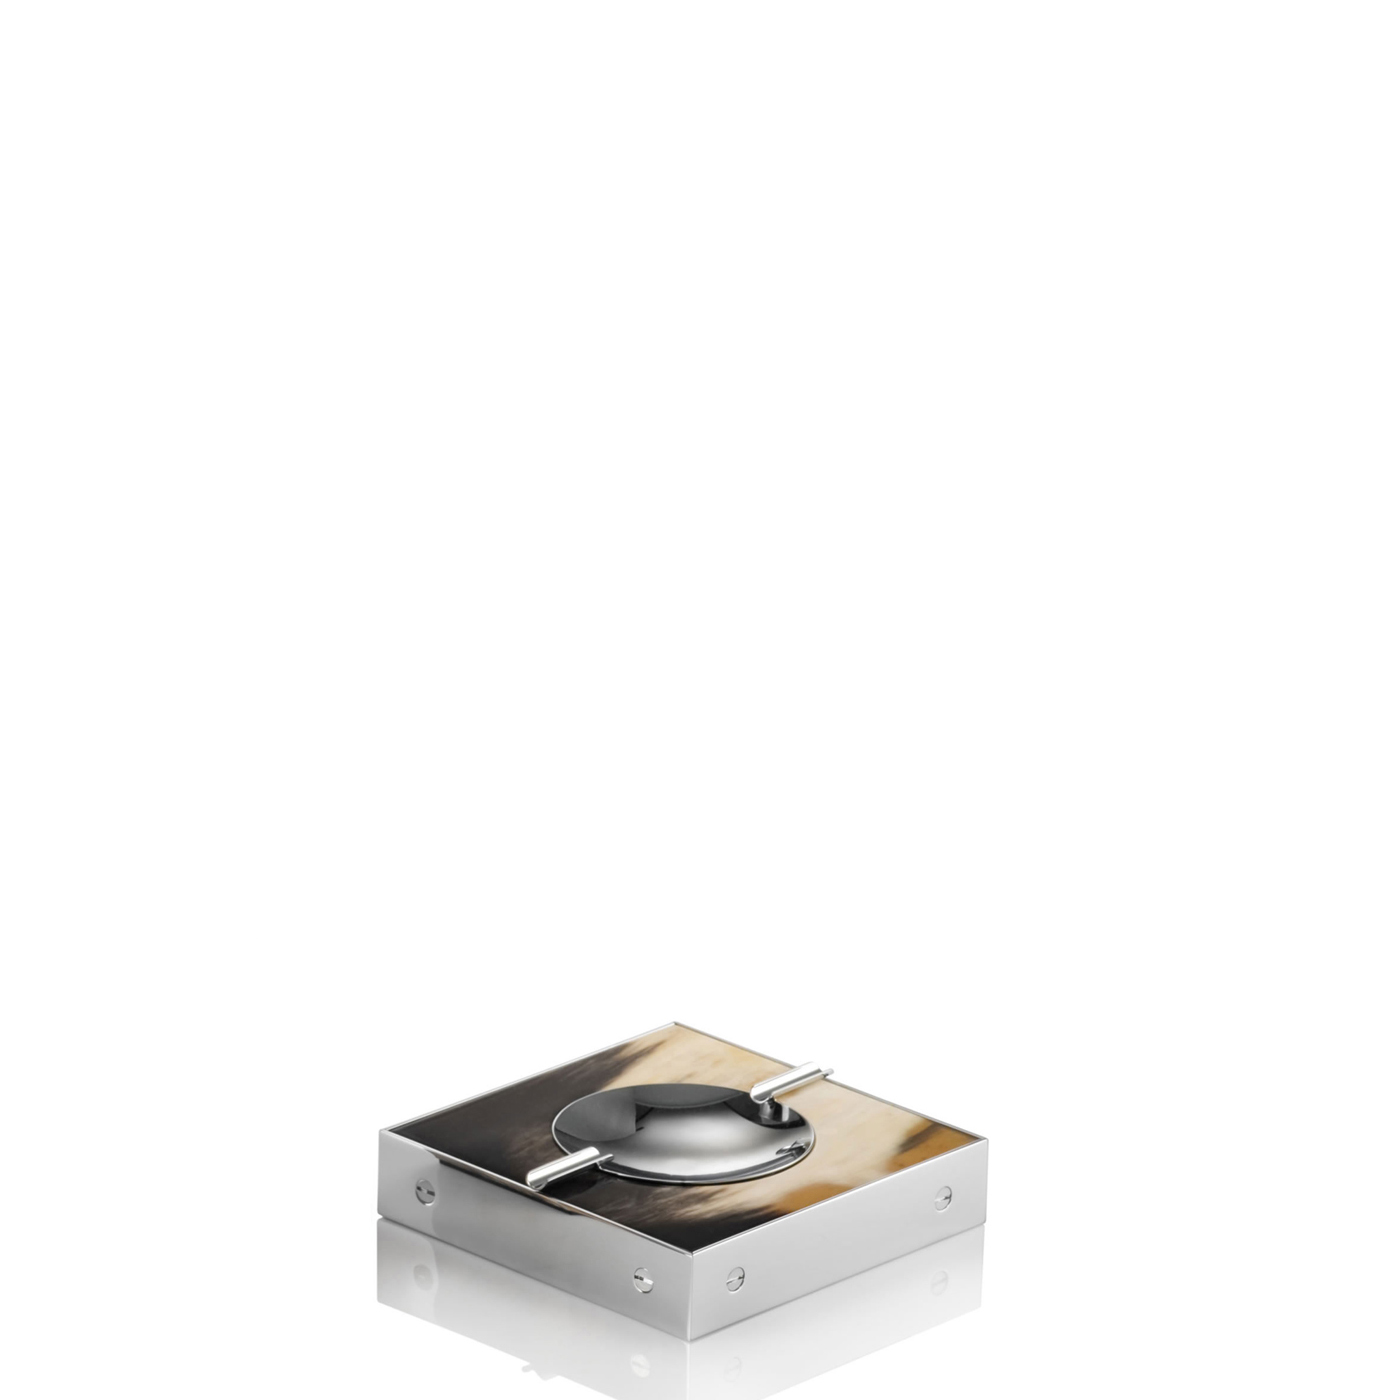 Office sets and smoking accessories - Cassio ashtray in horn and chromed brass mod. 1367 - Arcahorn